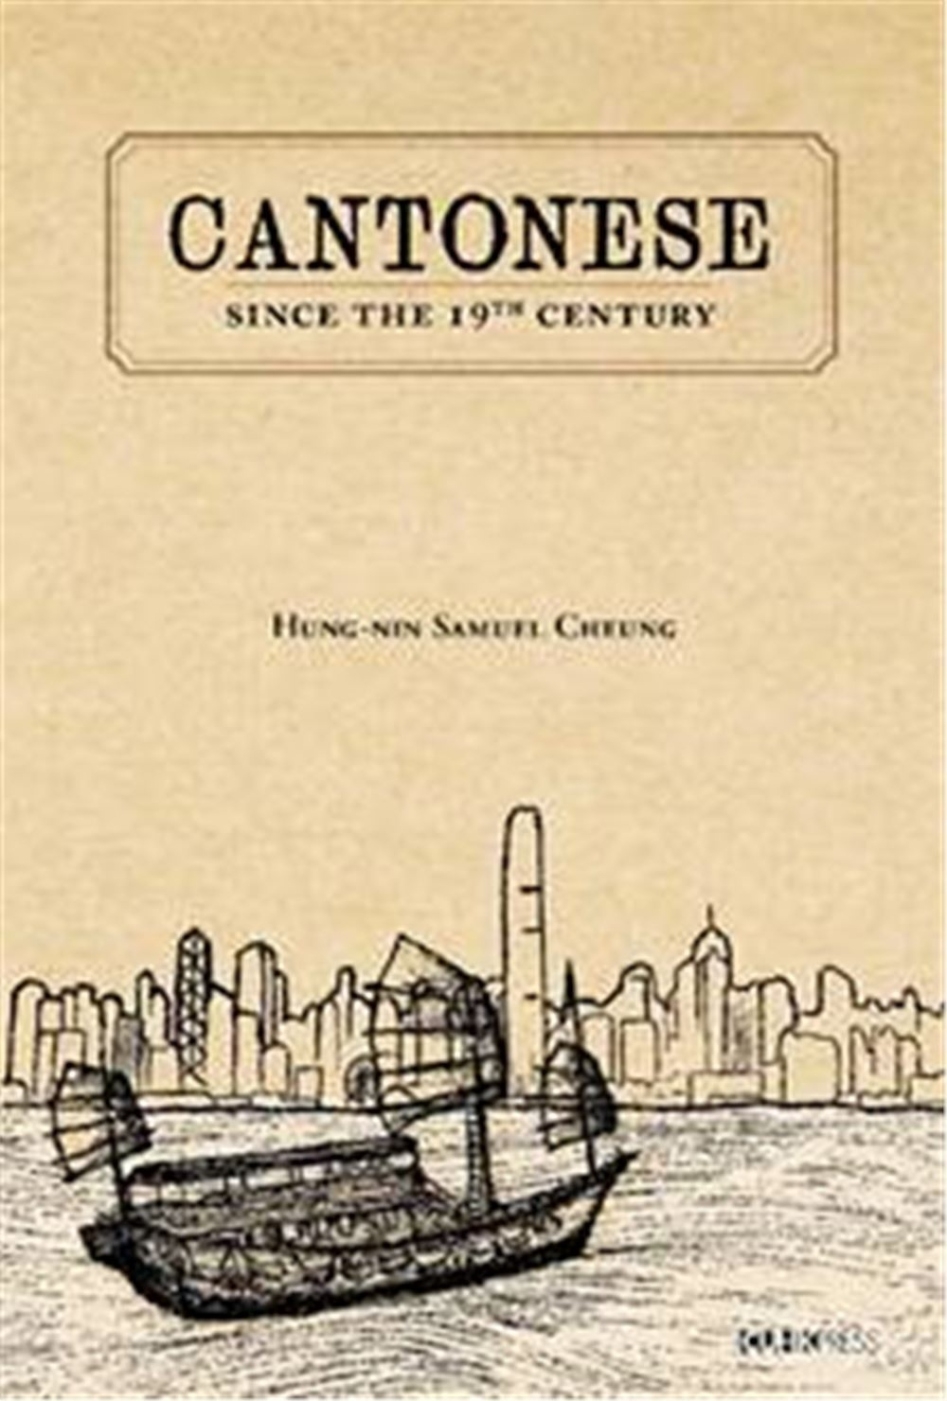 Cantonese: Since the 19th Century